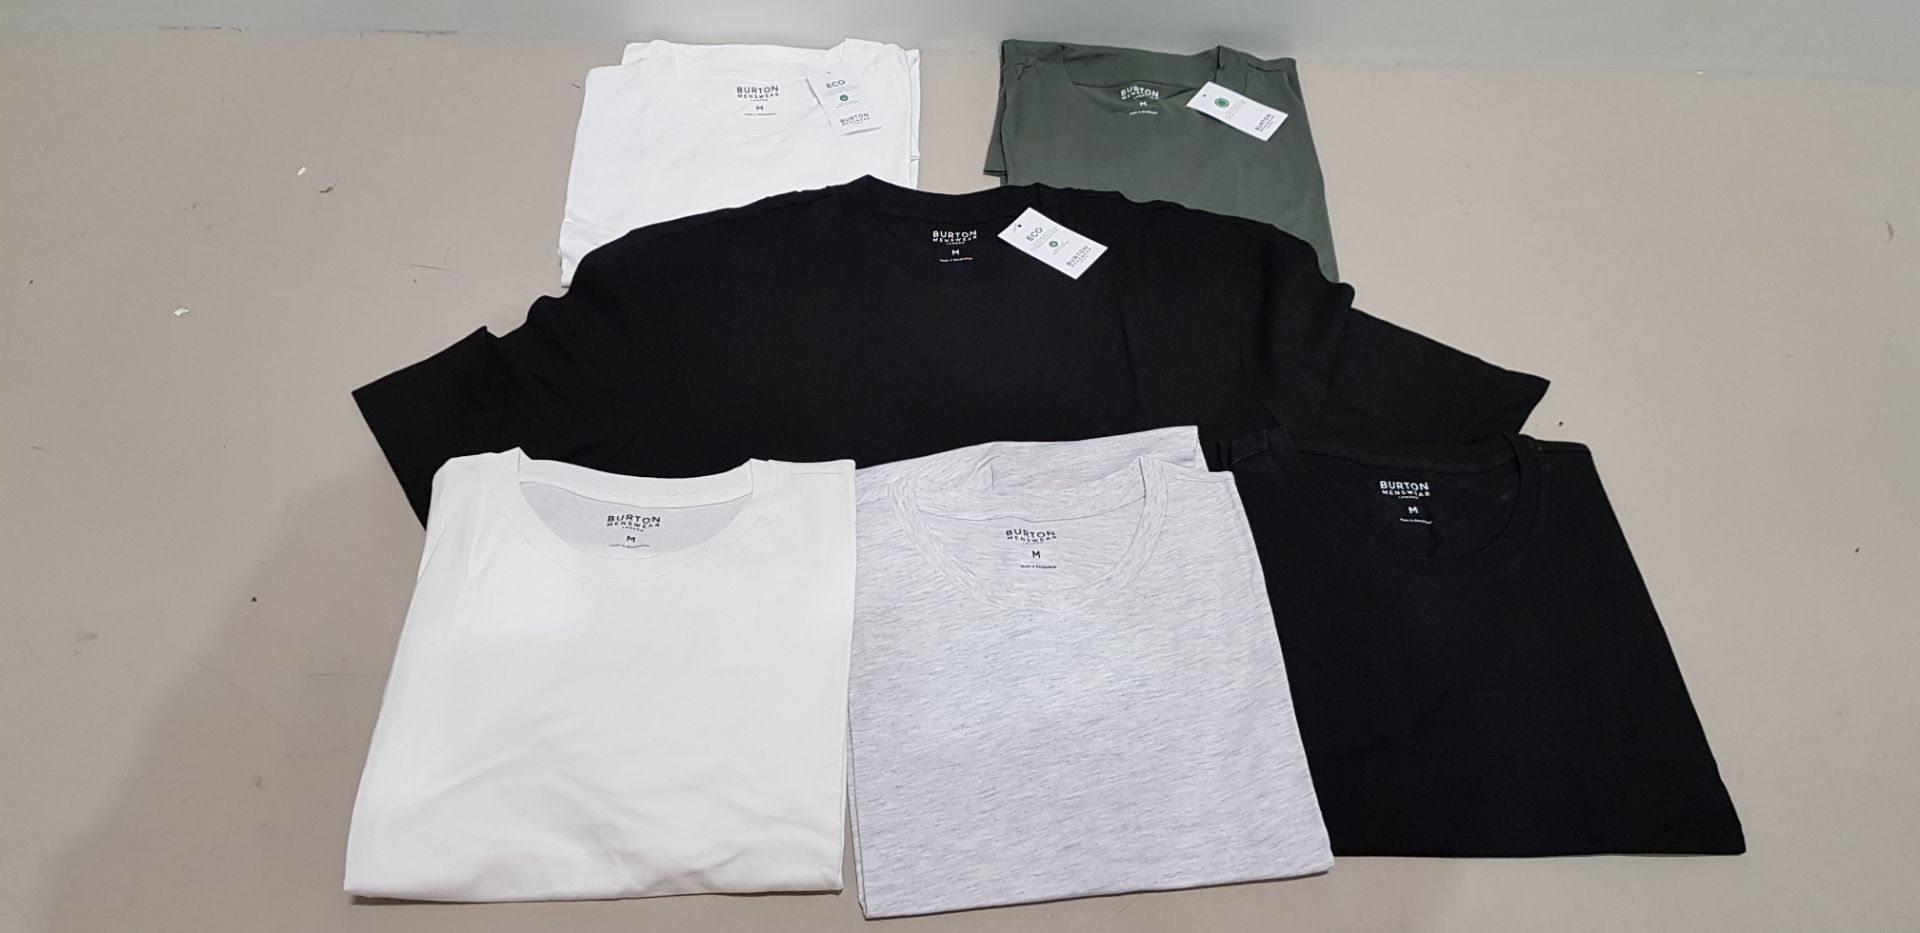 12 X BRAND NEW PACKS OF 3 BURTON MENSWEAR T-SHITS IN PACKS OF (GREEN / WHITE /BLACK) AND ( BLACK /